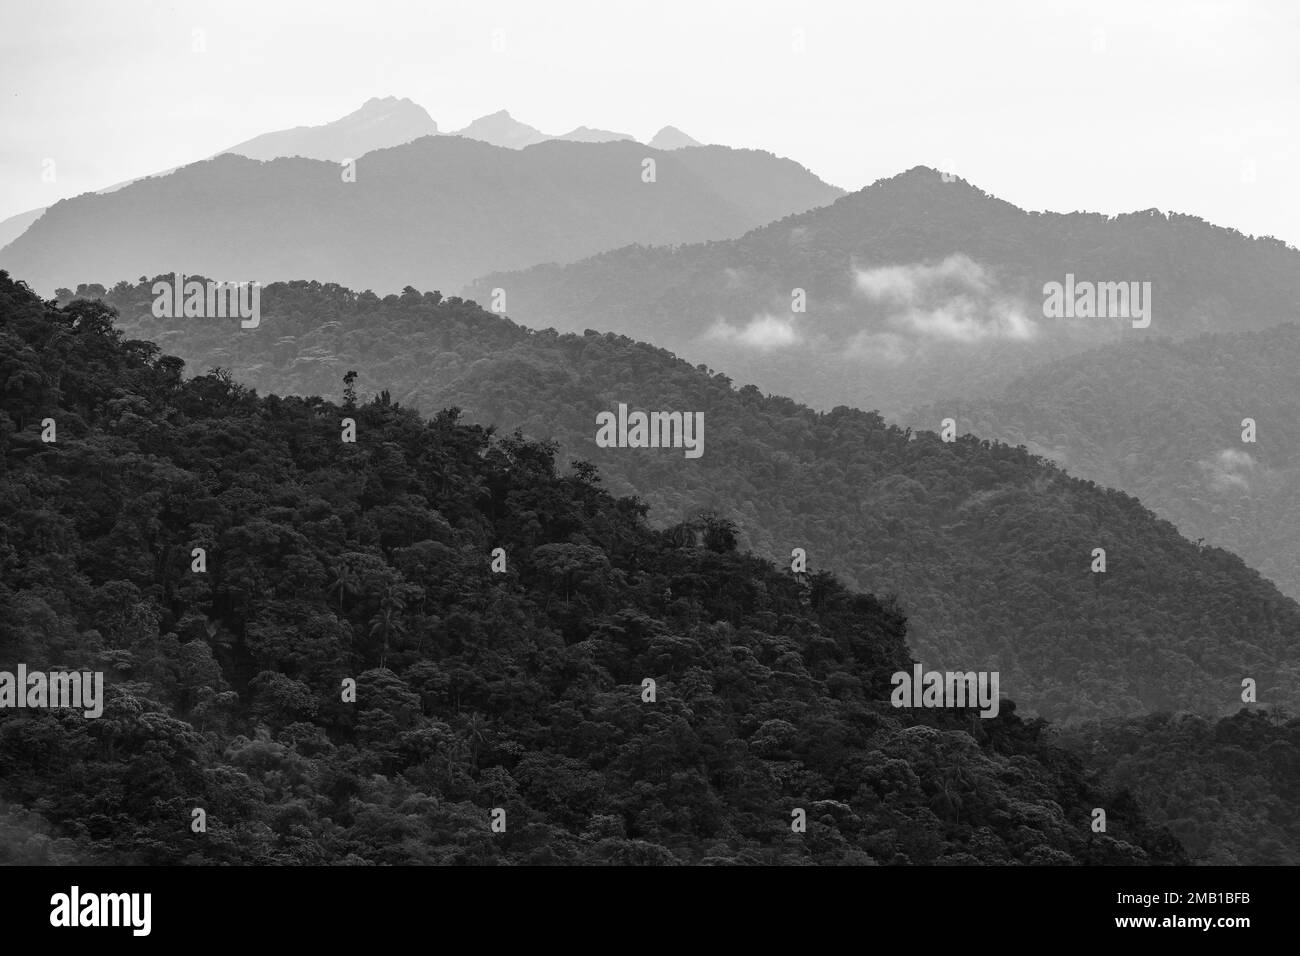 Cloud forest in the Andes mountains in black and white. Stock Photo